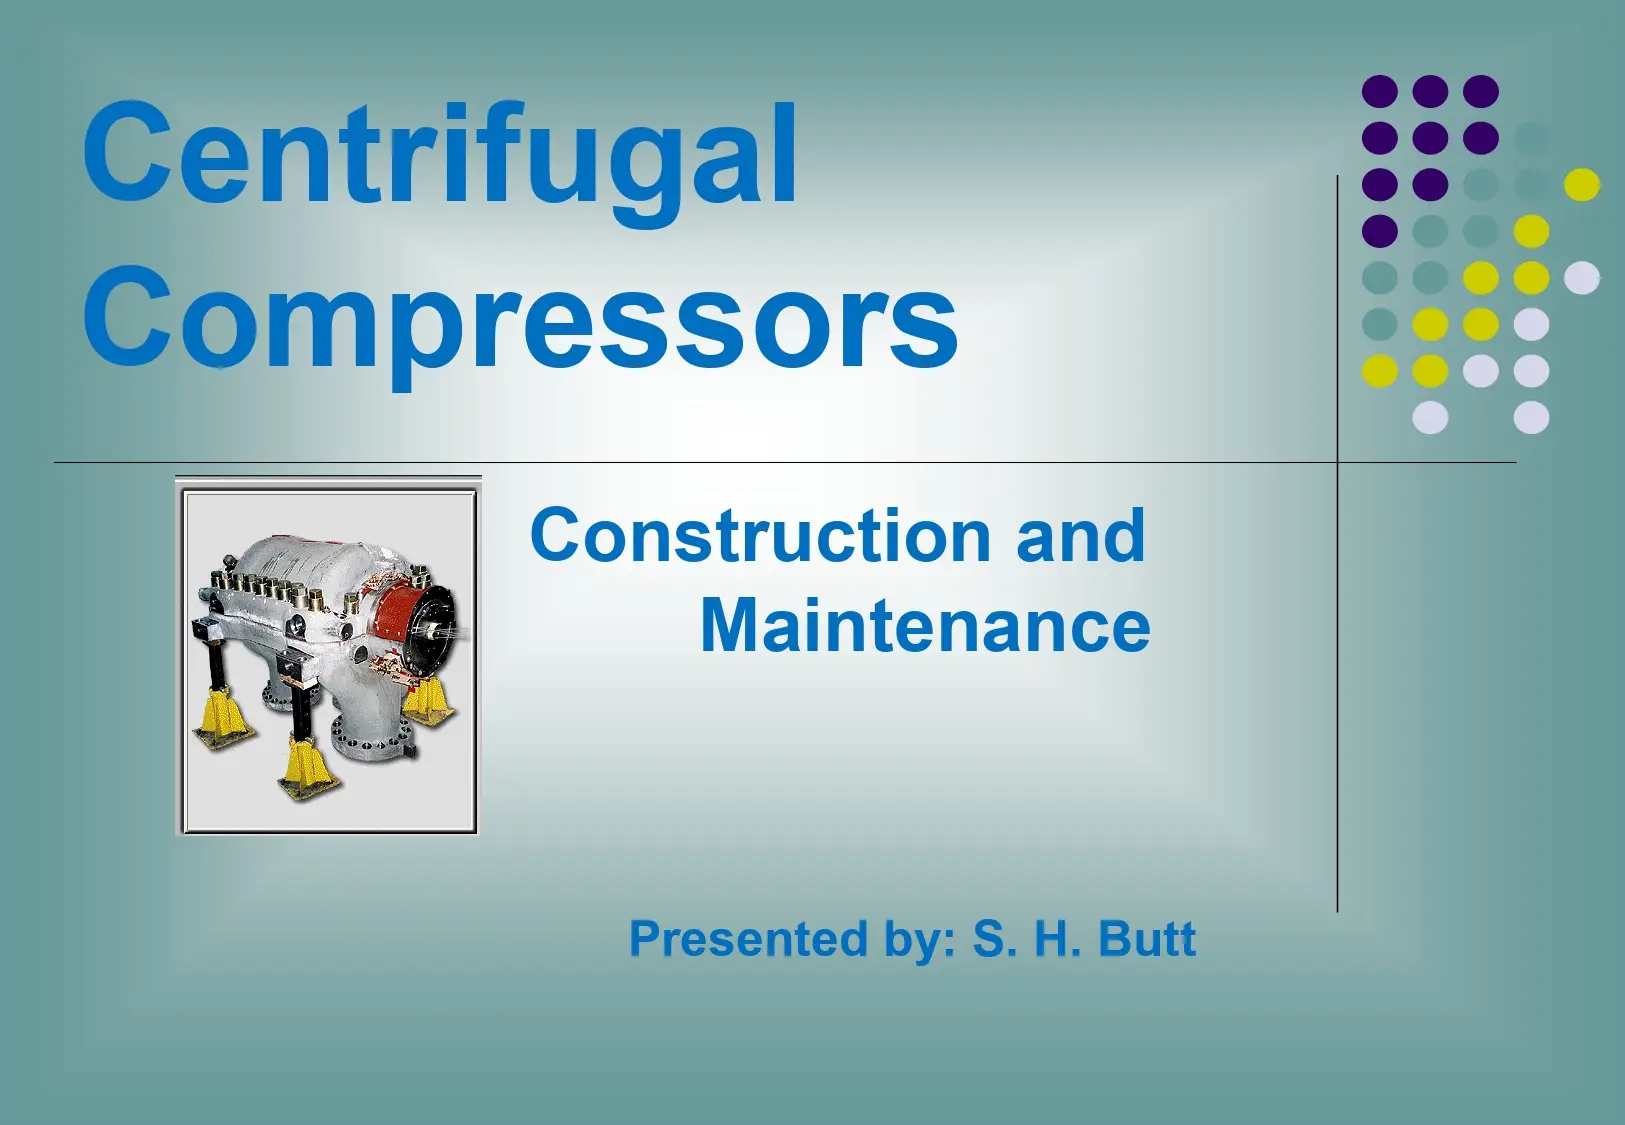 Centrifugal Compressors Construction and Maintenance